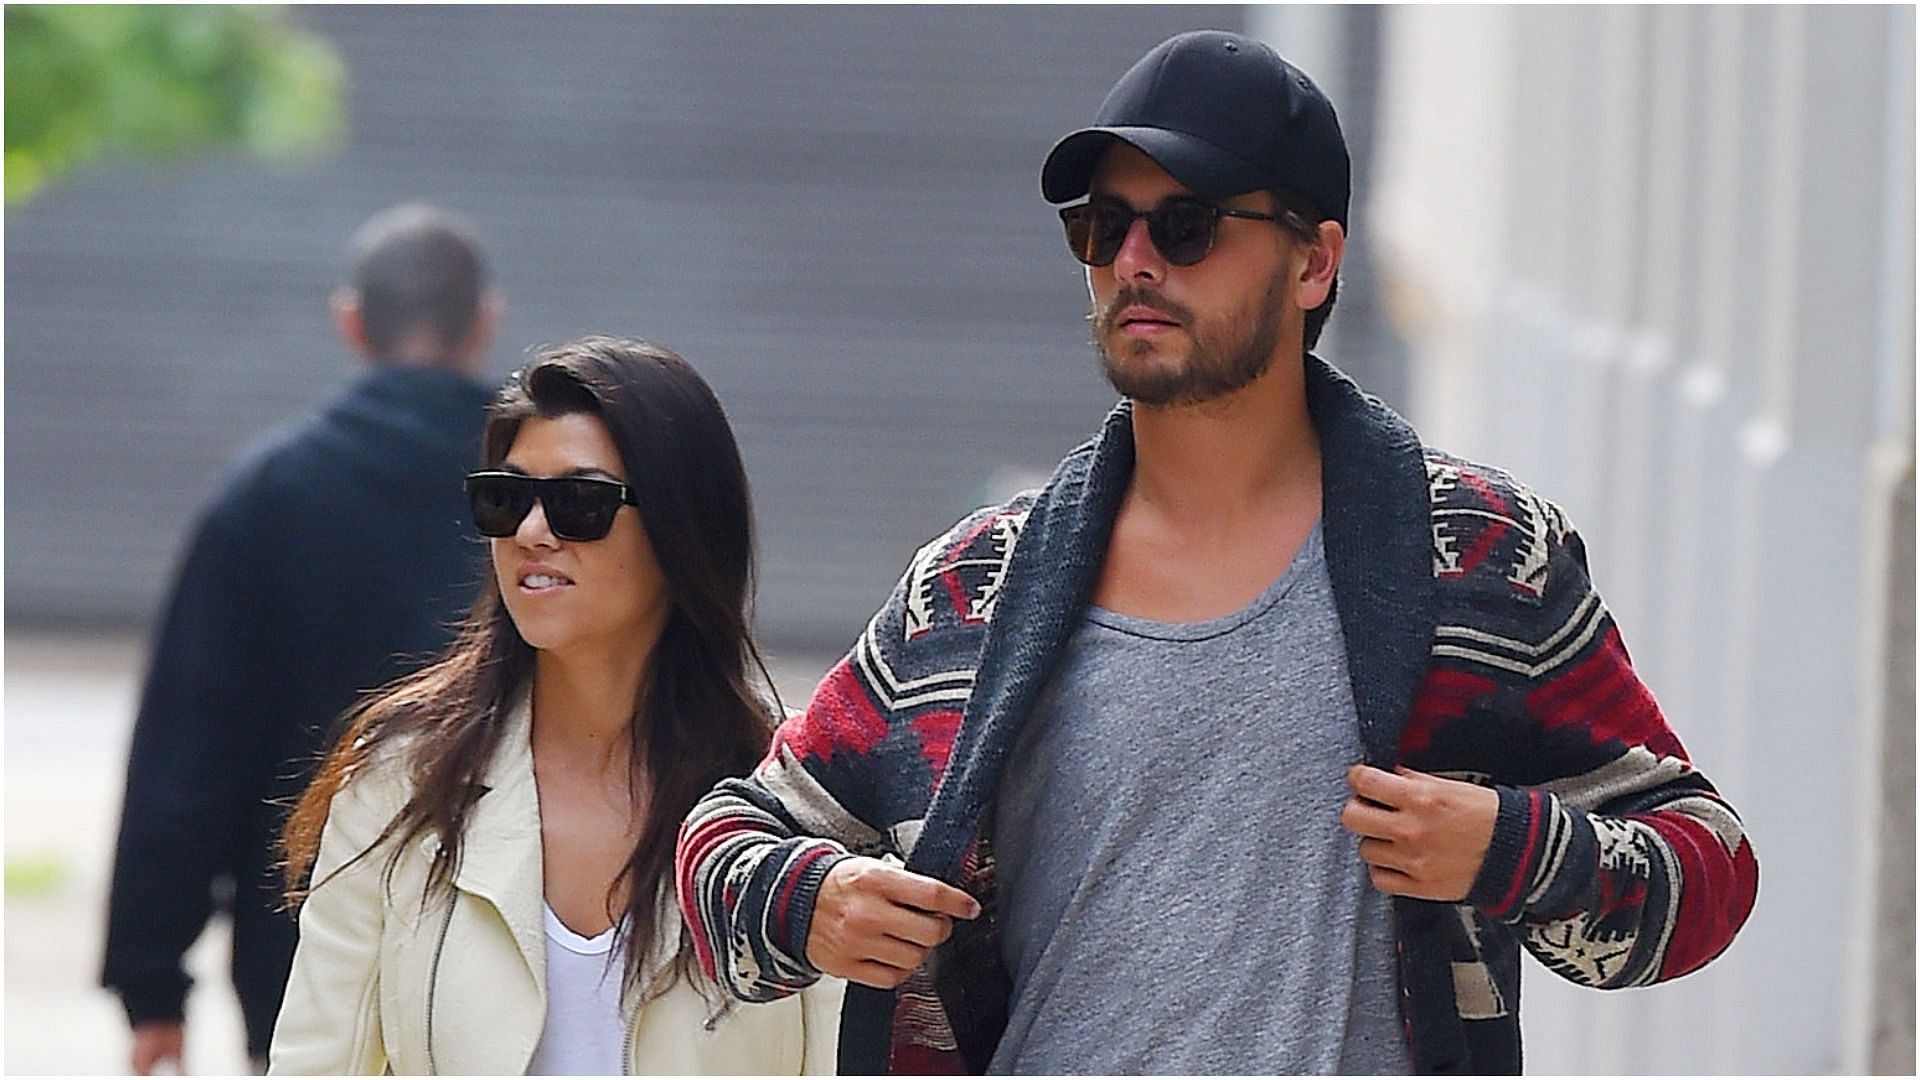 Kourtney Kardashian and Scott Disick are seen on May 31, 2014, in New York City (Image via Getty Images)